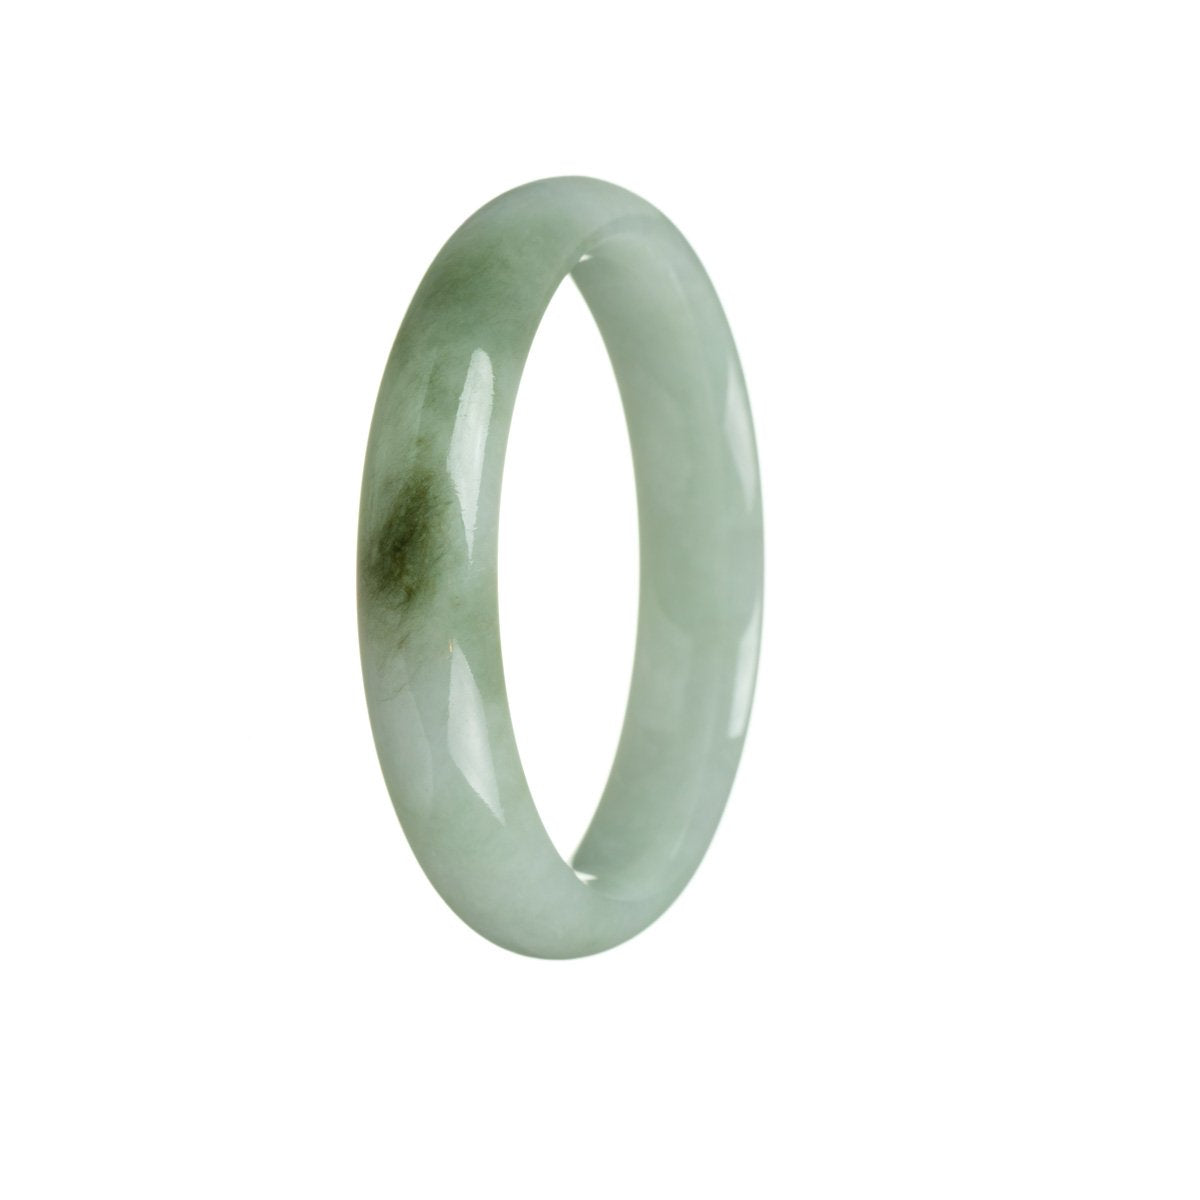 A bracelet made of pale green Burma jade with a unique pattern, shaped like a half moon.